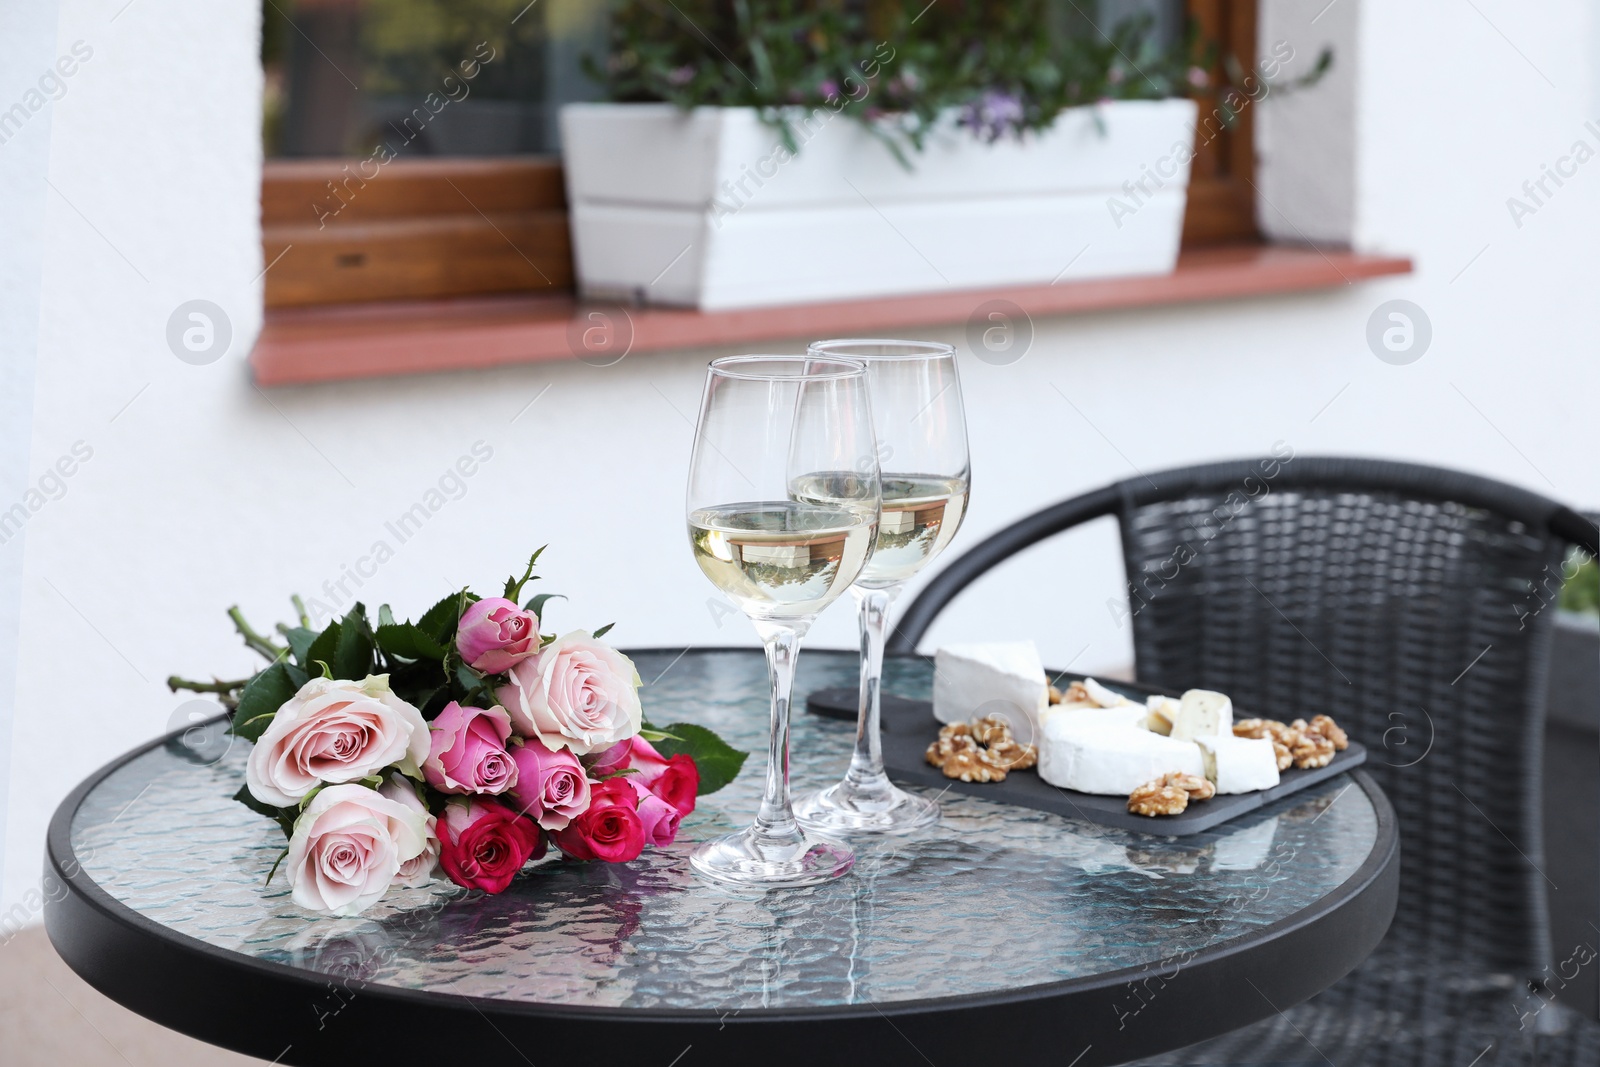 Photo of Bouquet of roses, glasses with wine and food on glass table near house on outdoor terrace